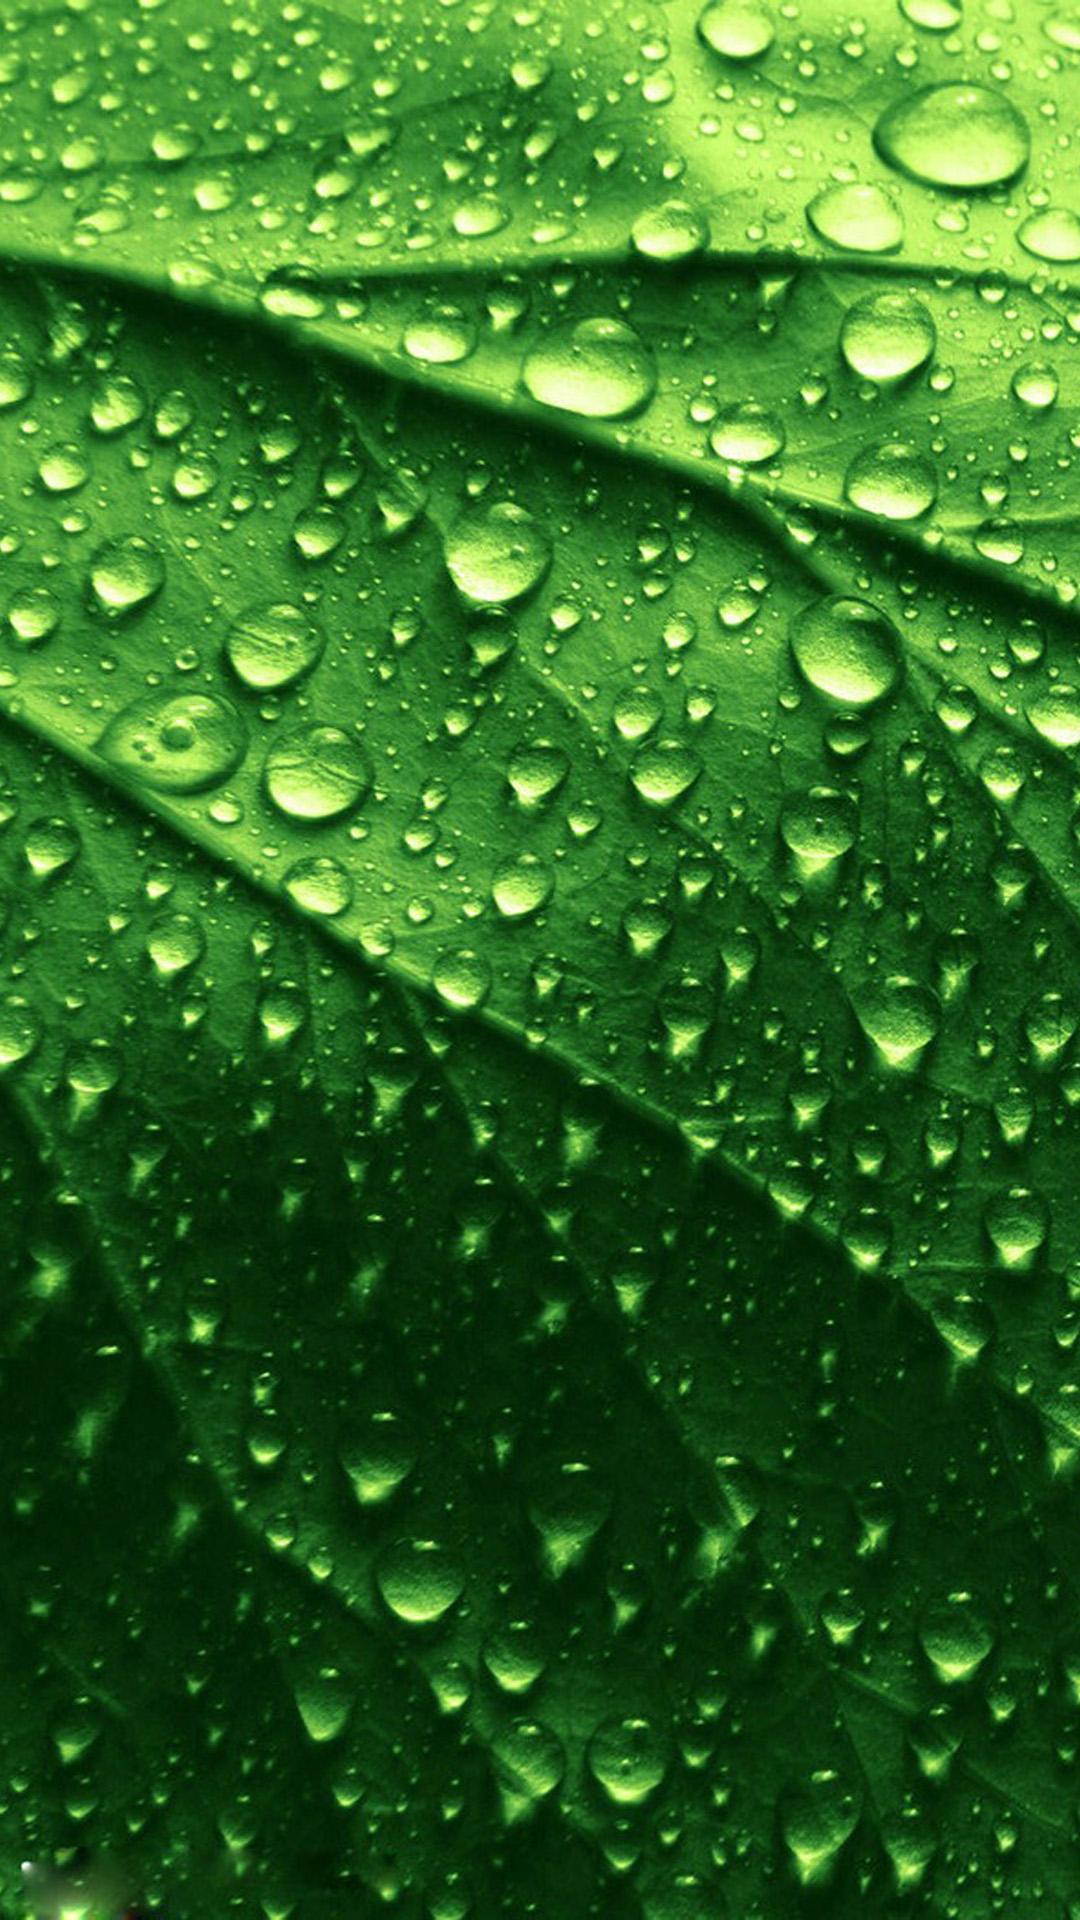 And Water Drops iPhone Plus Wallpaper HD